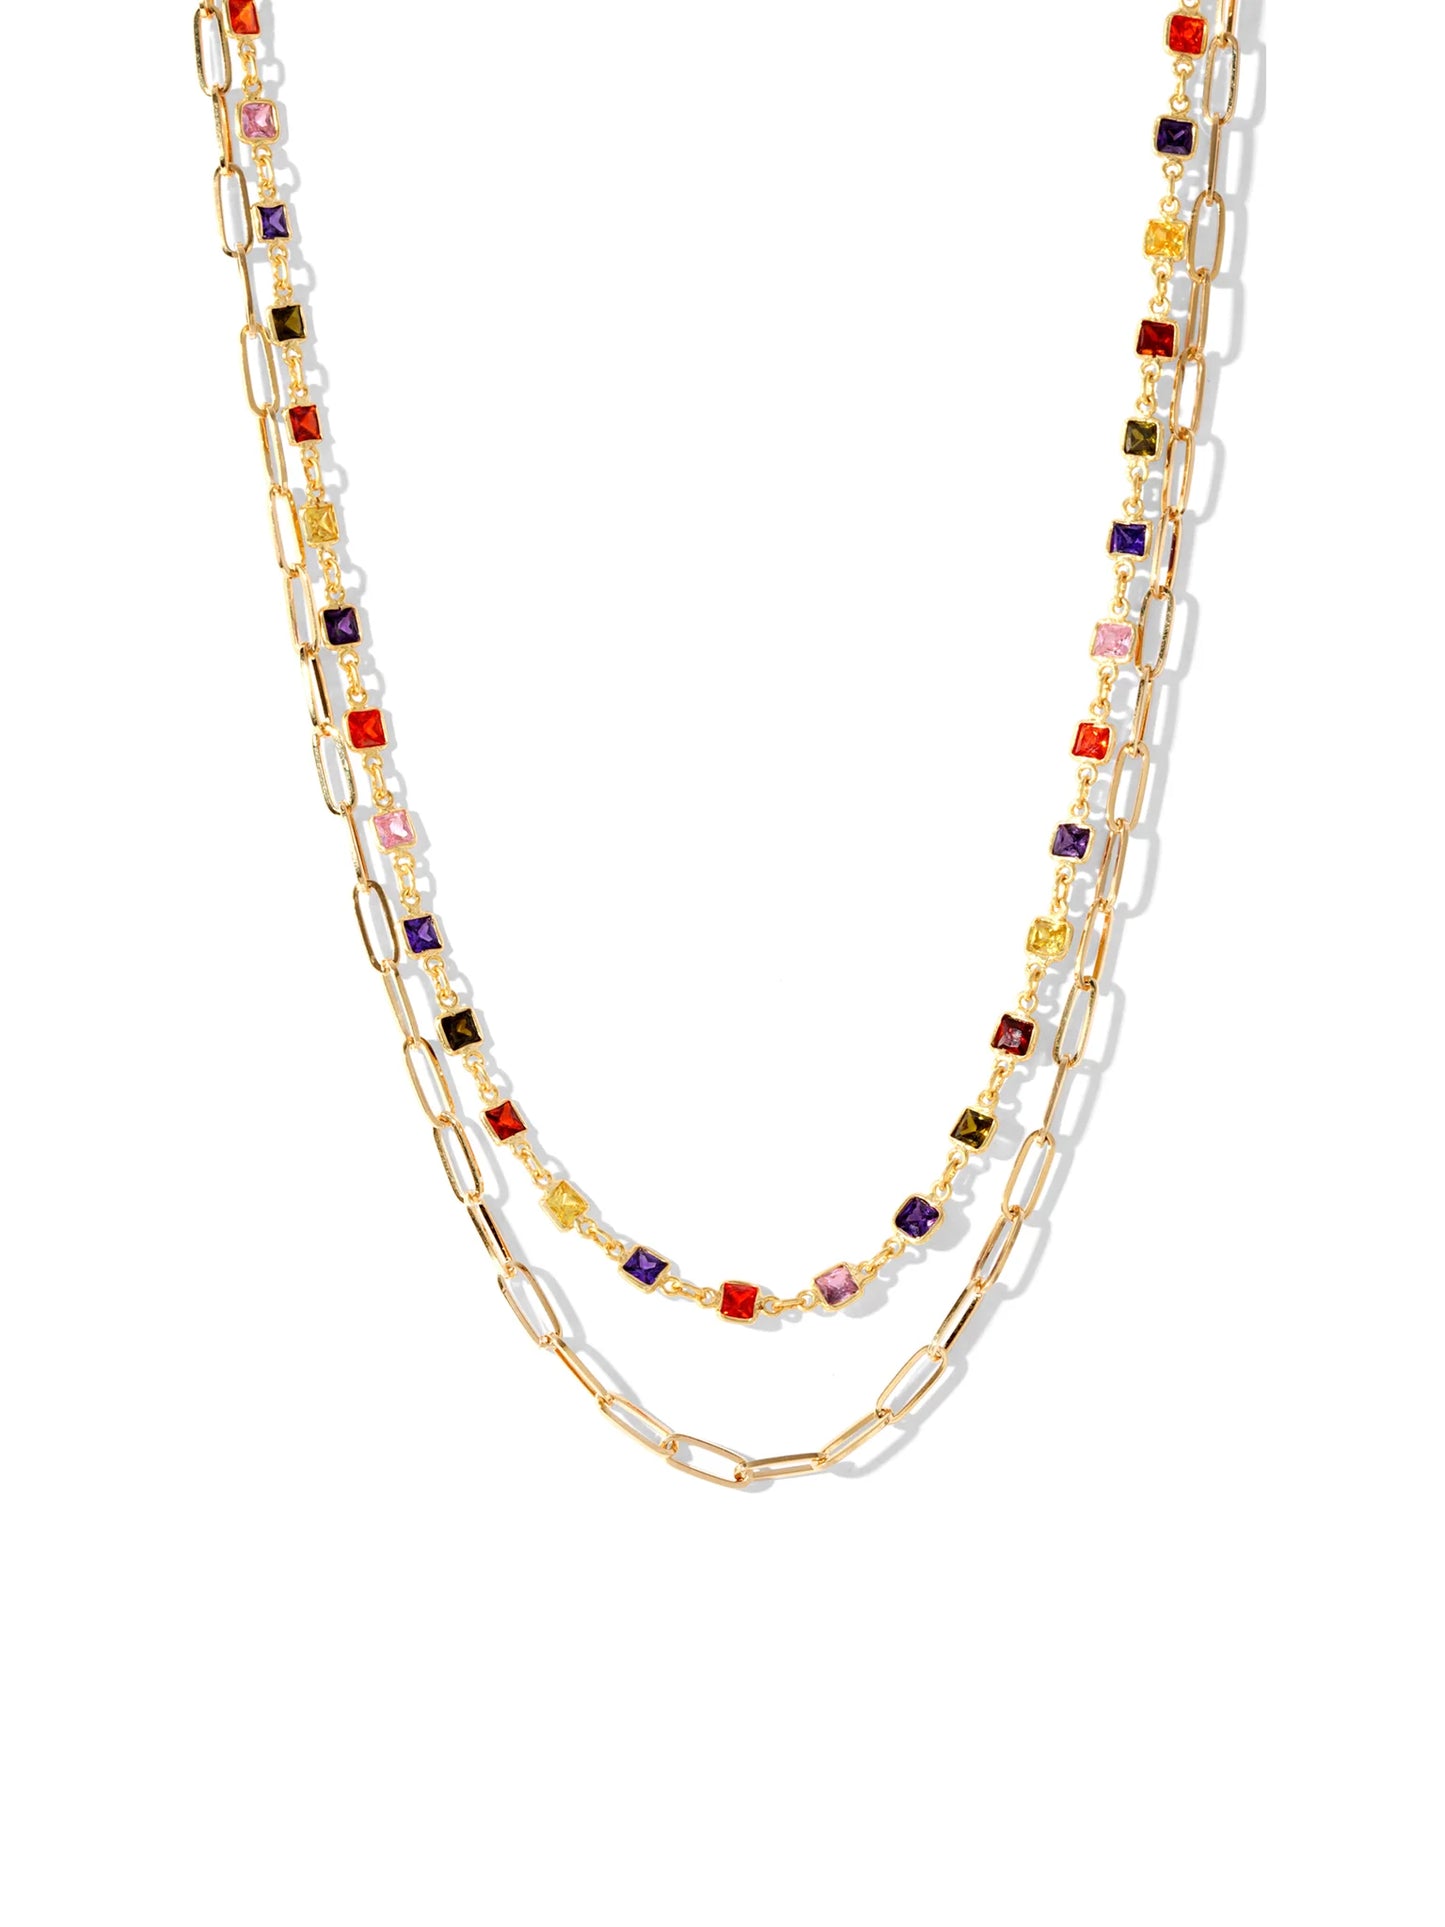 The Arlette Necklace